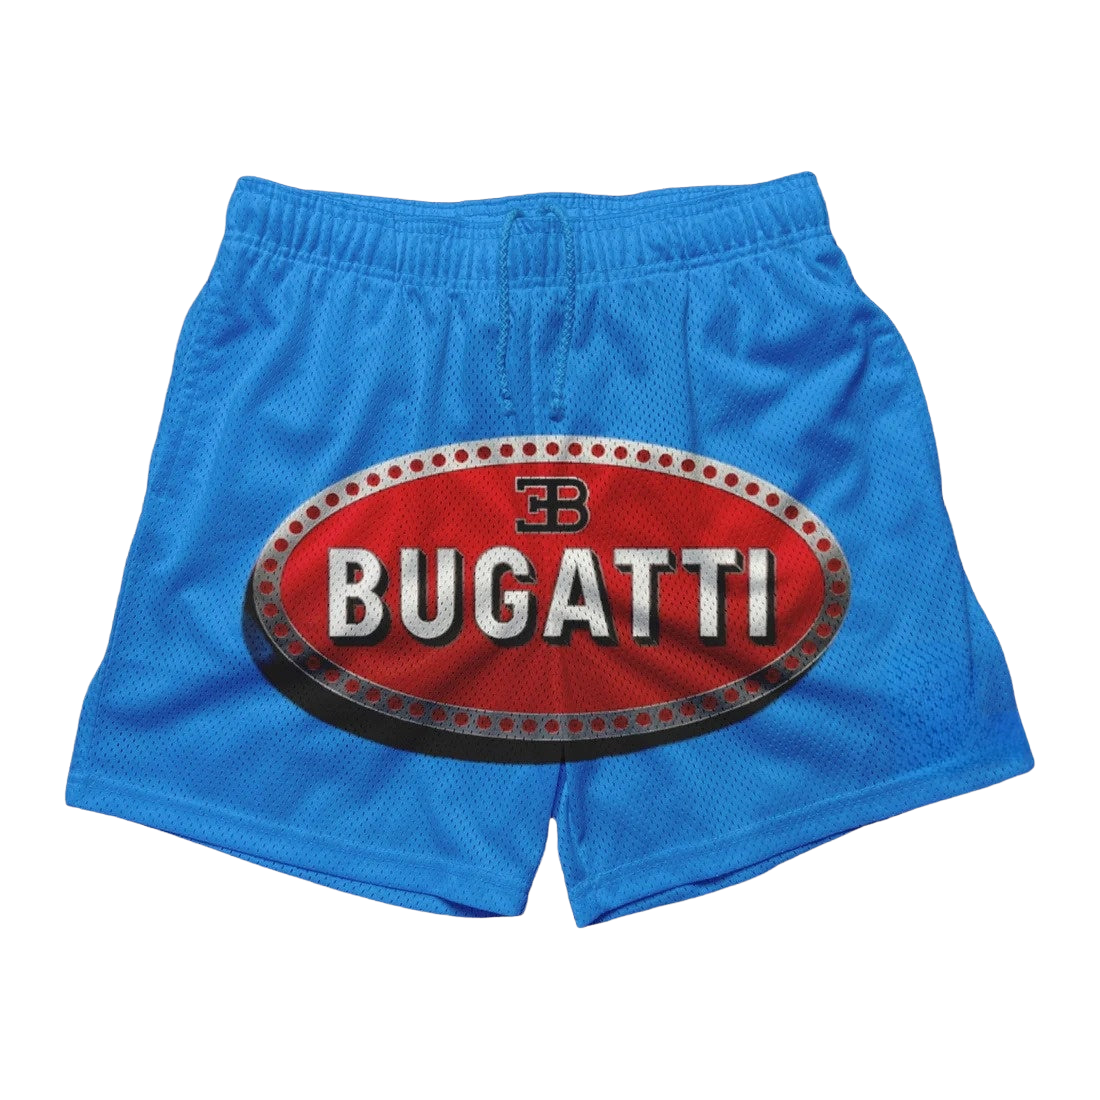 a blue shorts with the word bugatti on it